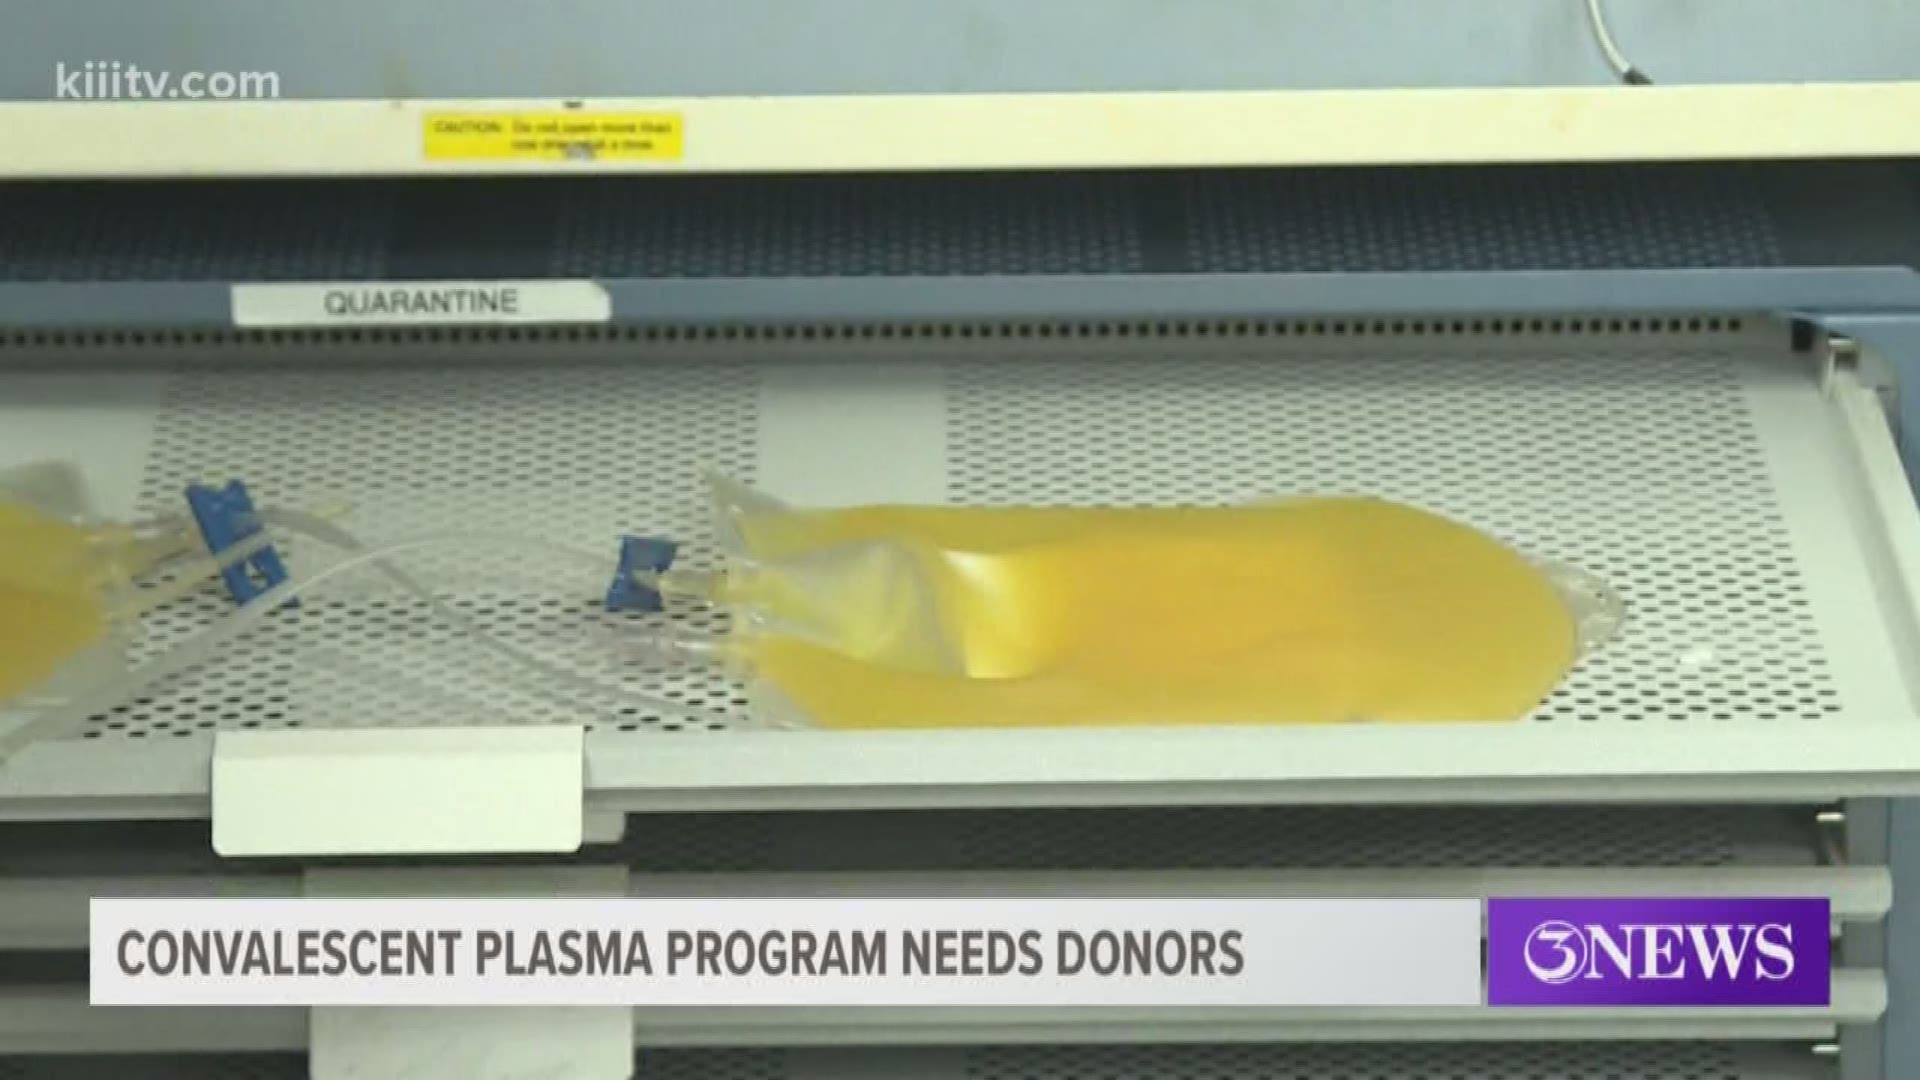 The blood center's convalescent plasma program started early on during the pandemic and has shown to help some hospitalized patients suffering from the virus.